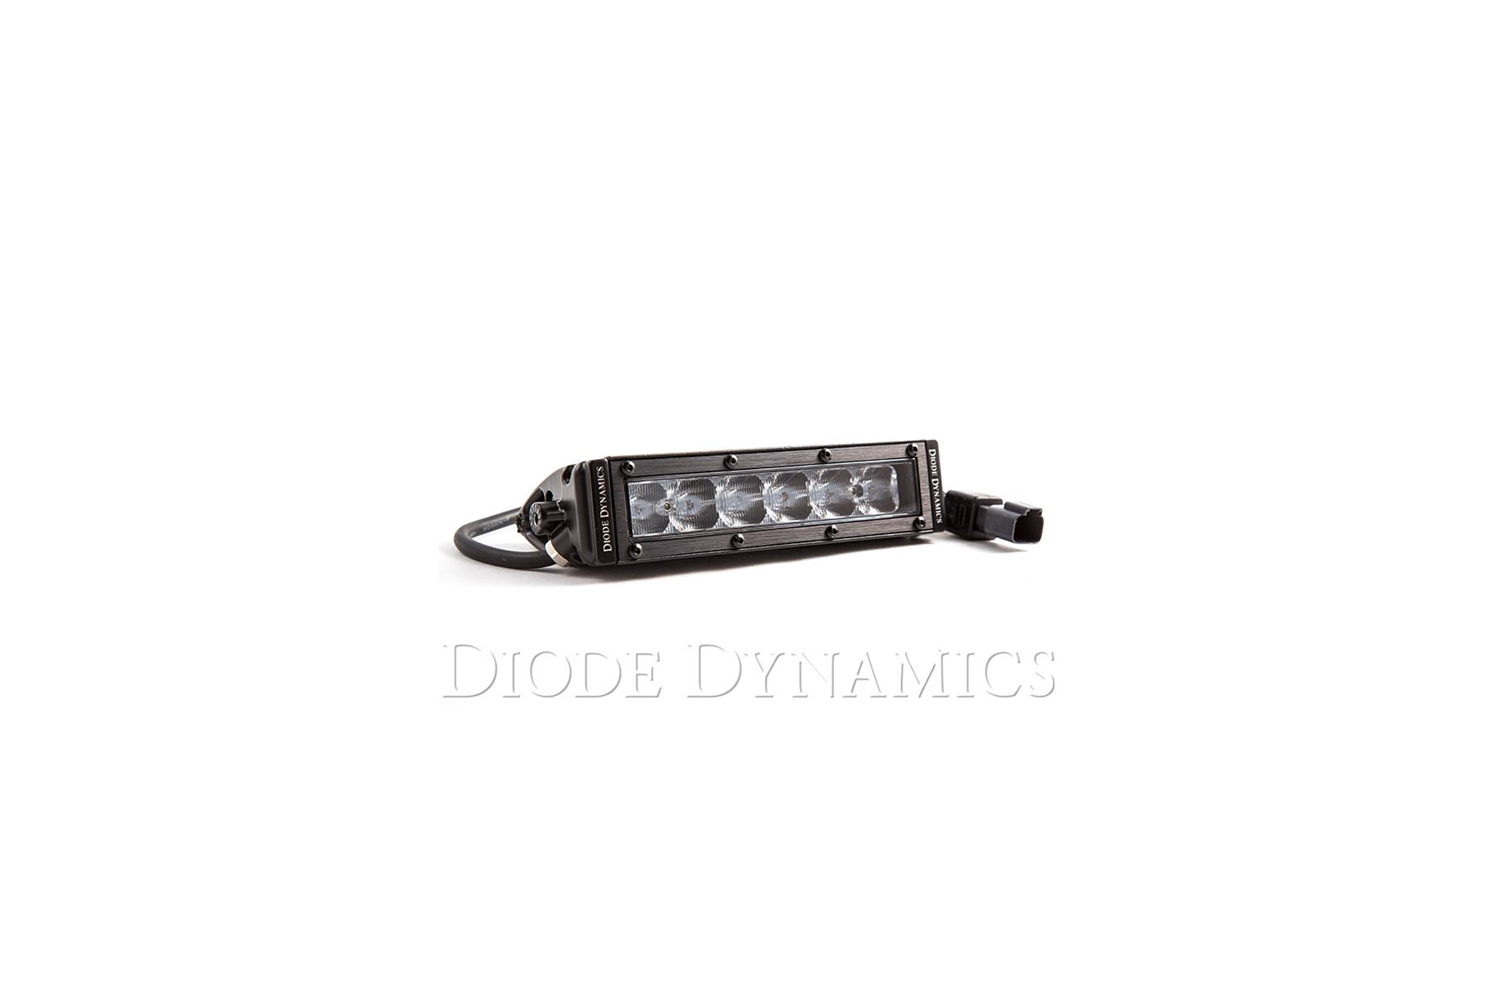 Why Choose Stage Series LED Light Bars?